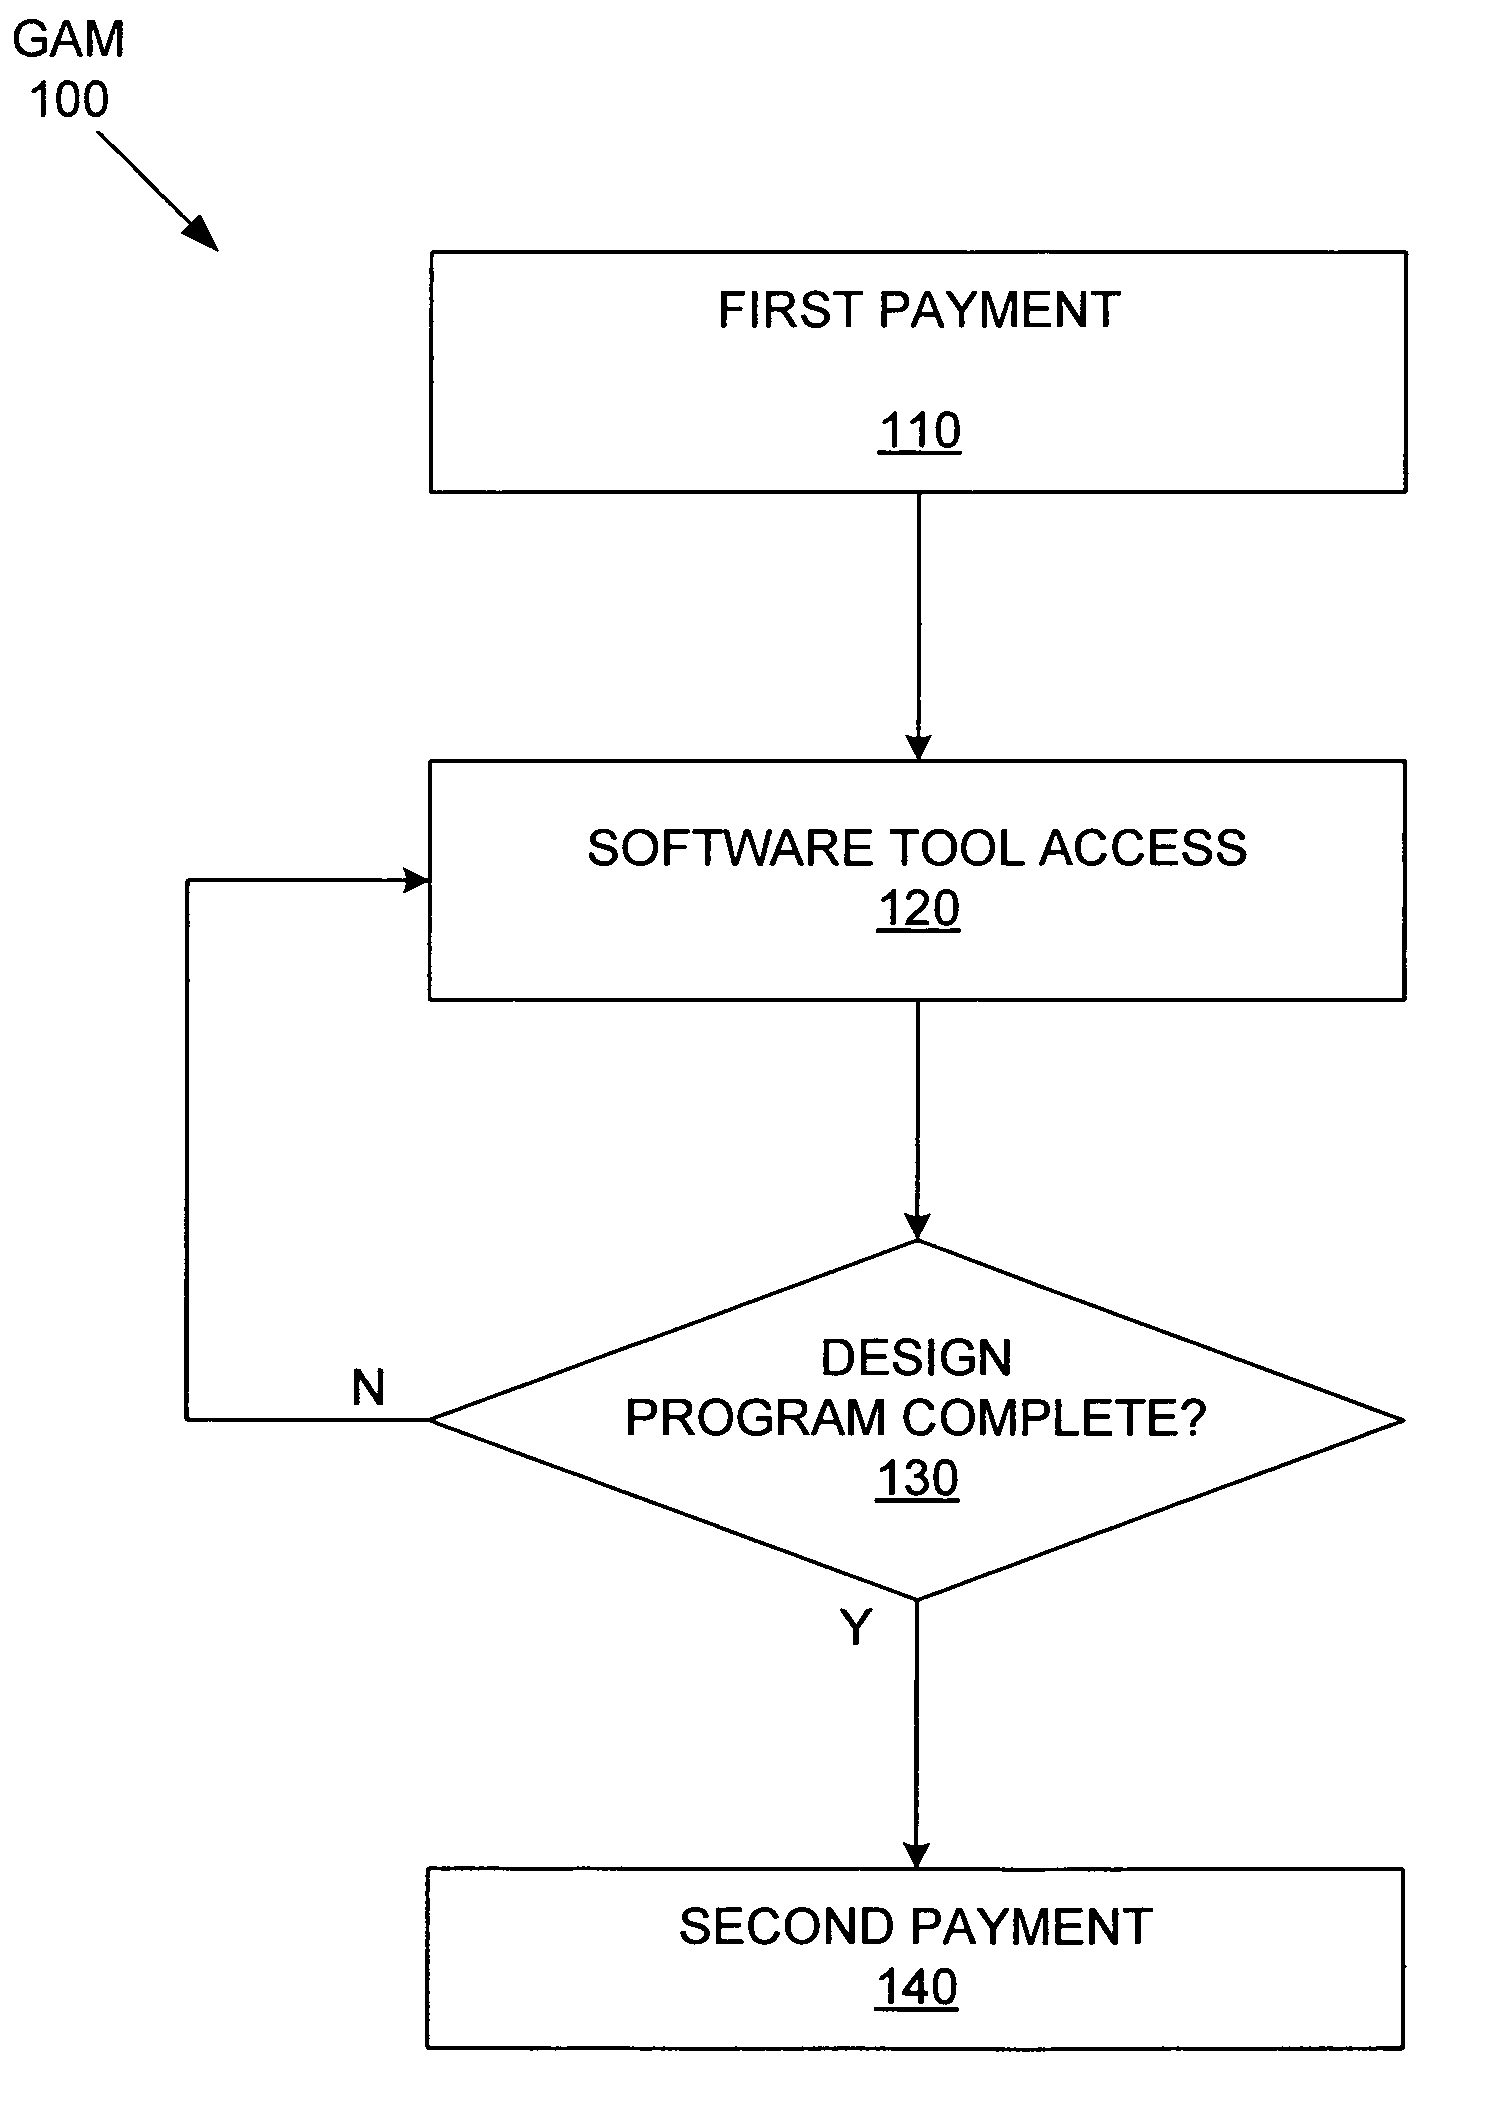 Method of enforcing a contract for a CAD tool